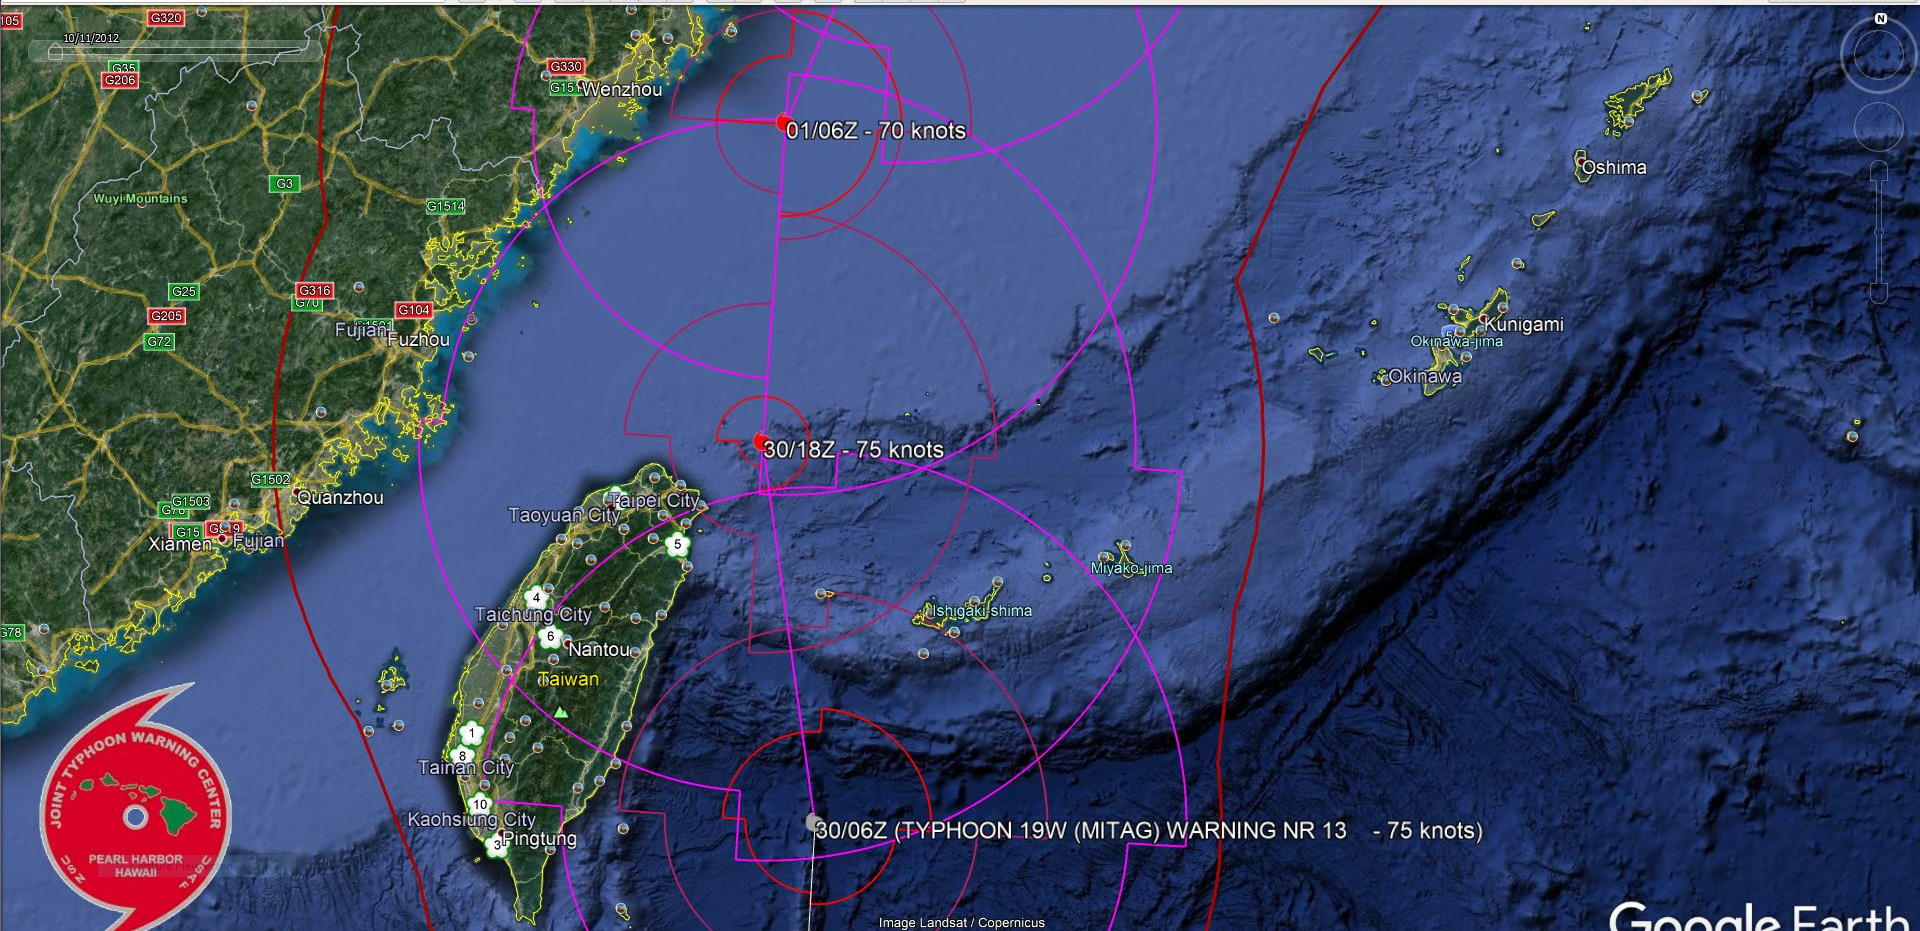 FORECAST TRACK EAST OF TAIWAN